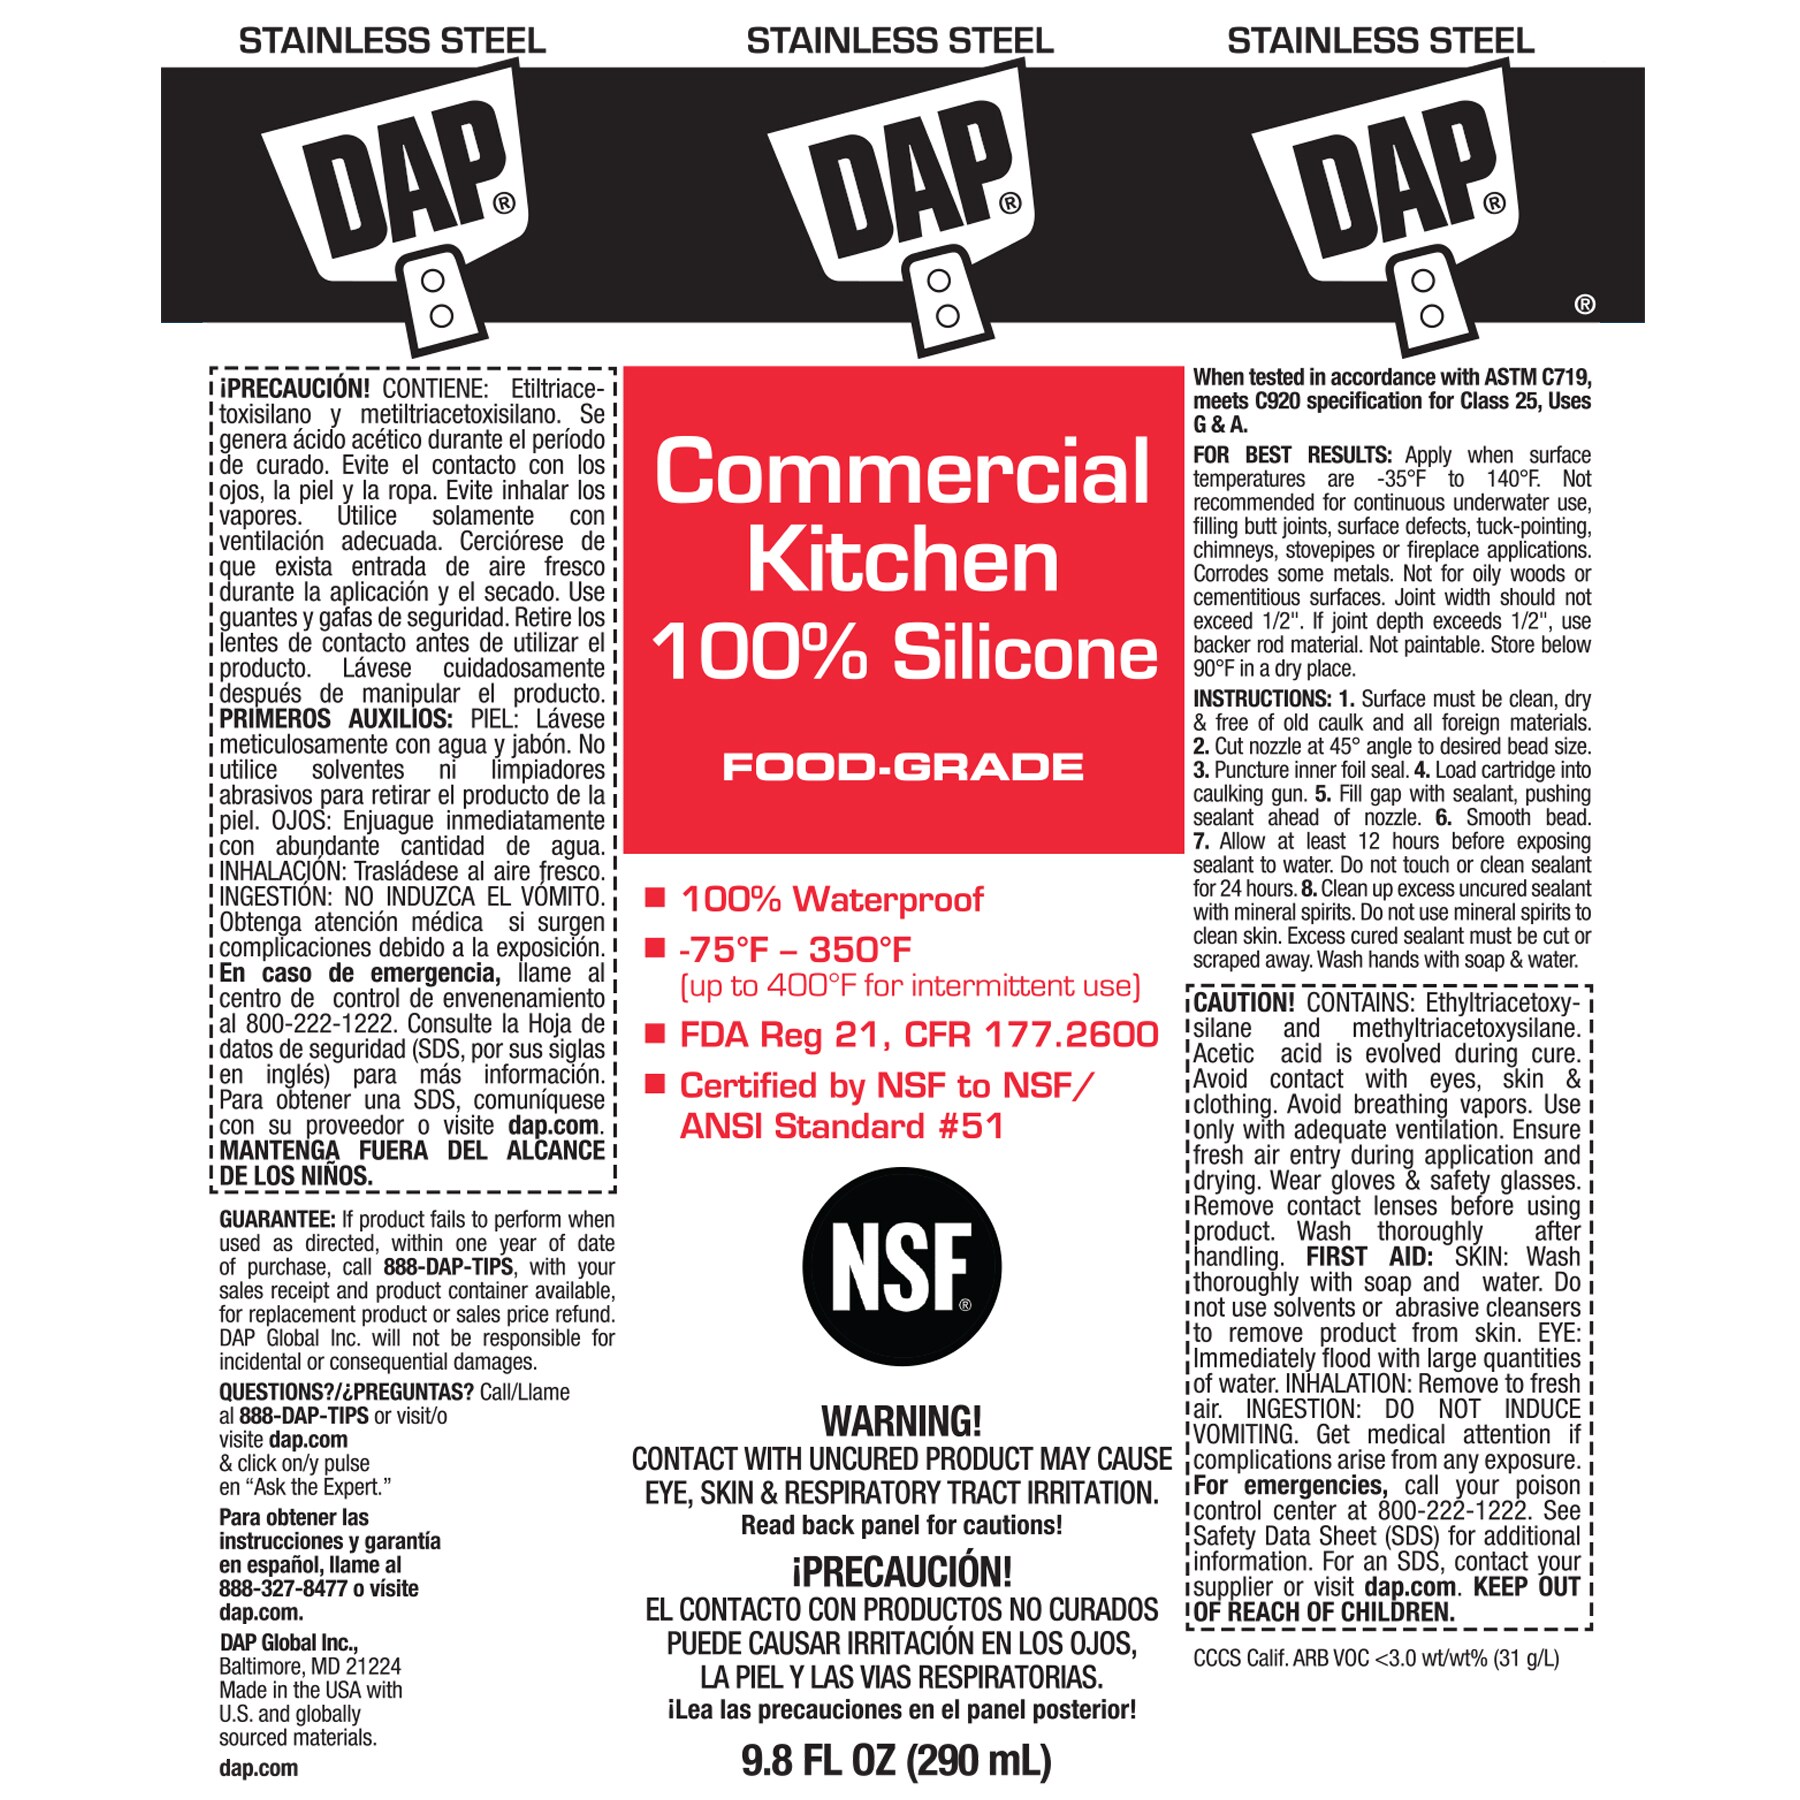 DAP 9.8 oz. Stainless Steel Commercial Kitchen 100% Silicone Sealant 70798  08660